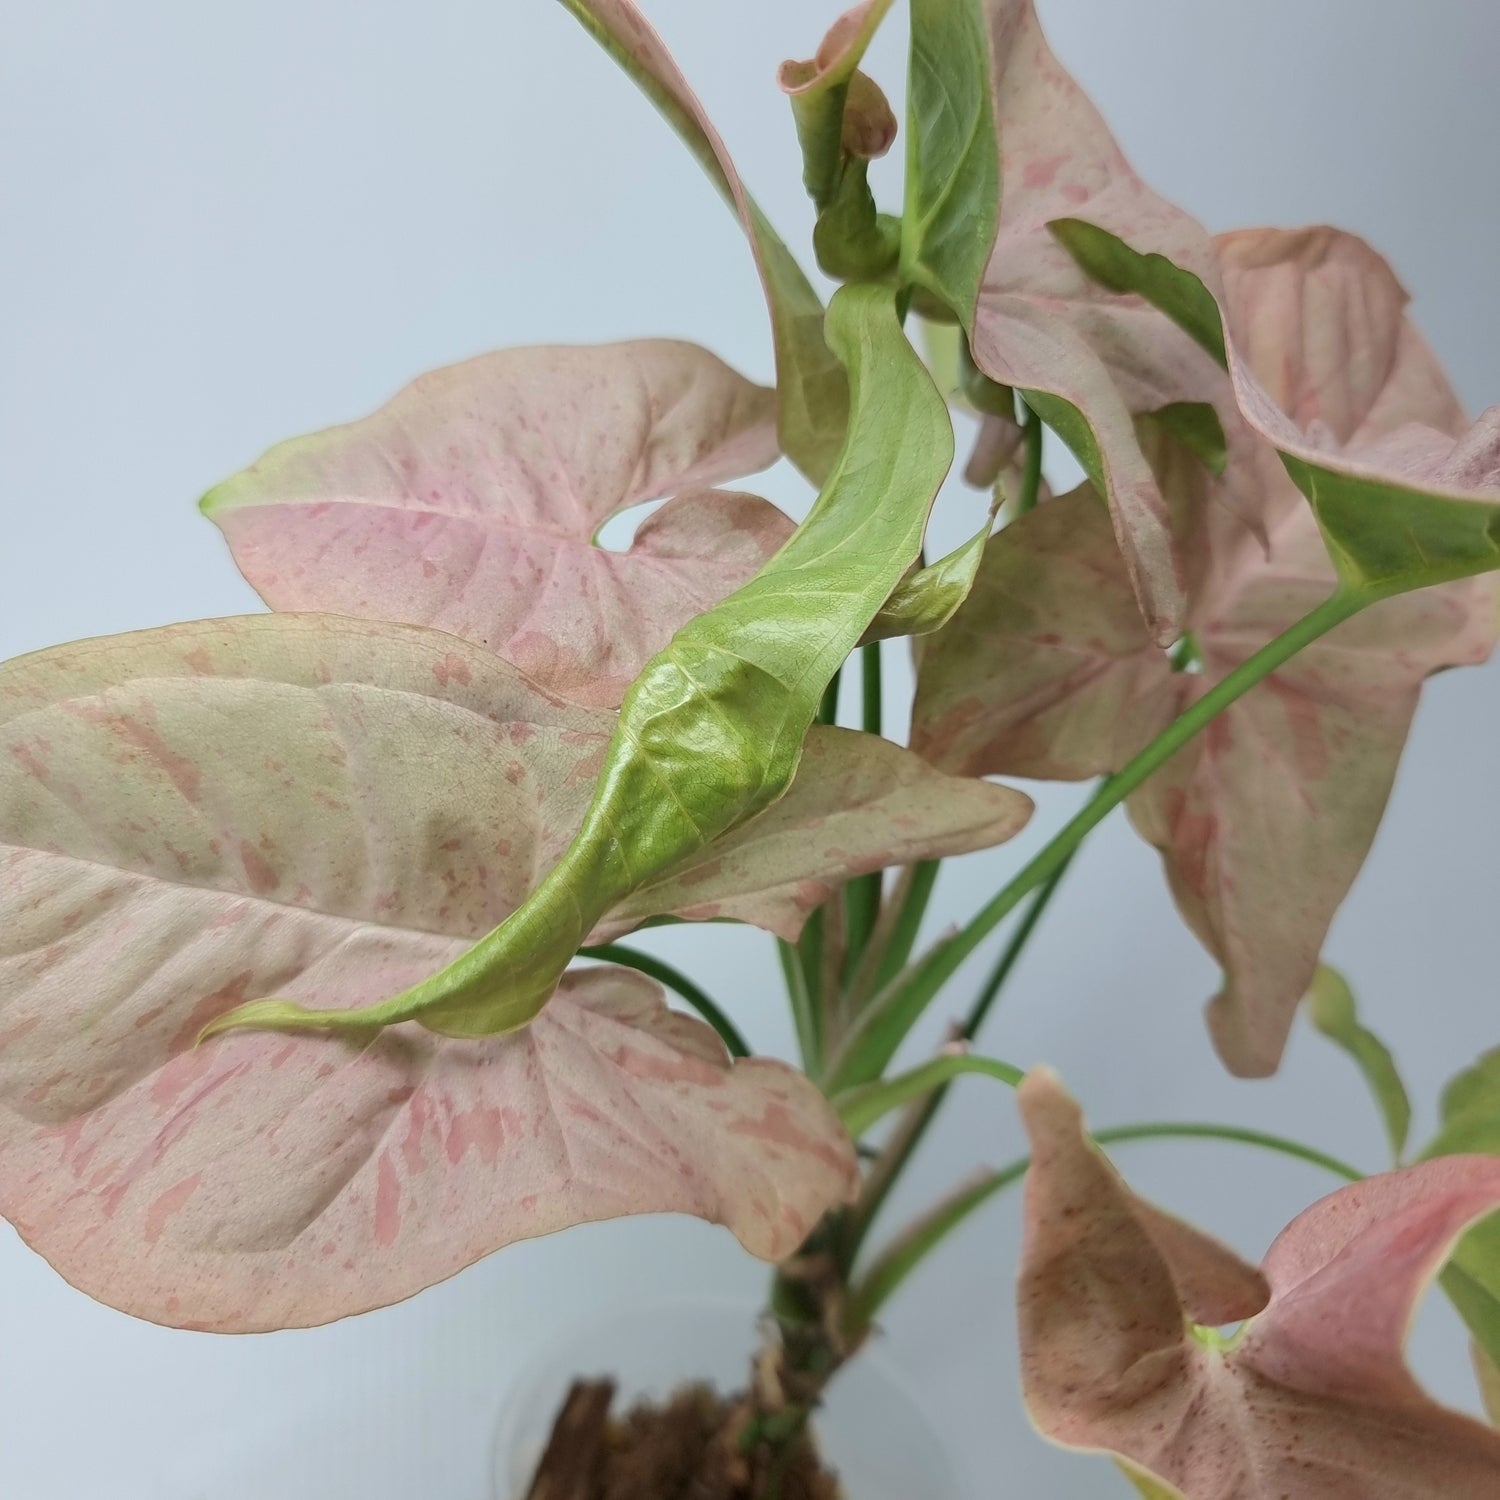 rare collectible Syngonium Pink Spot for sale in Perth Australia